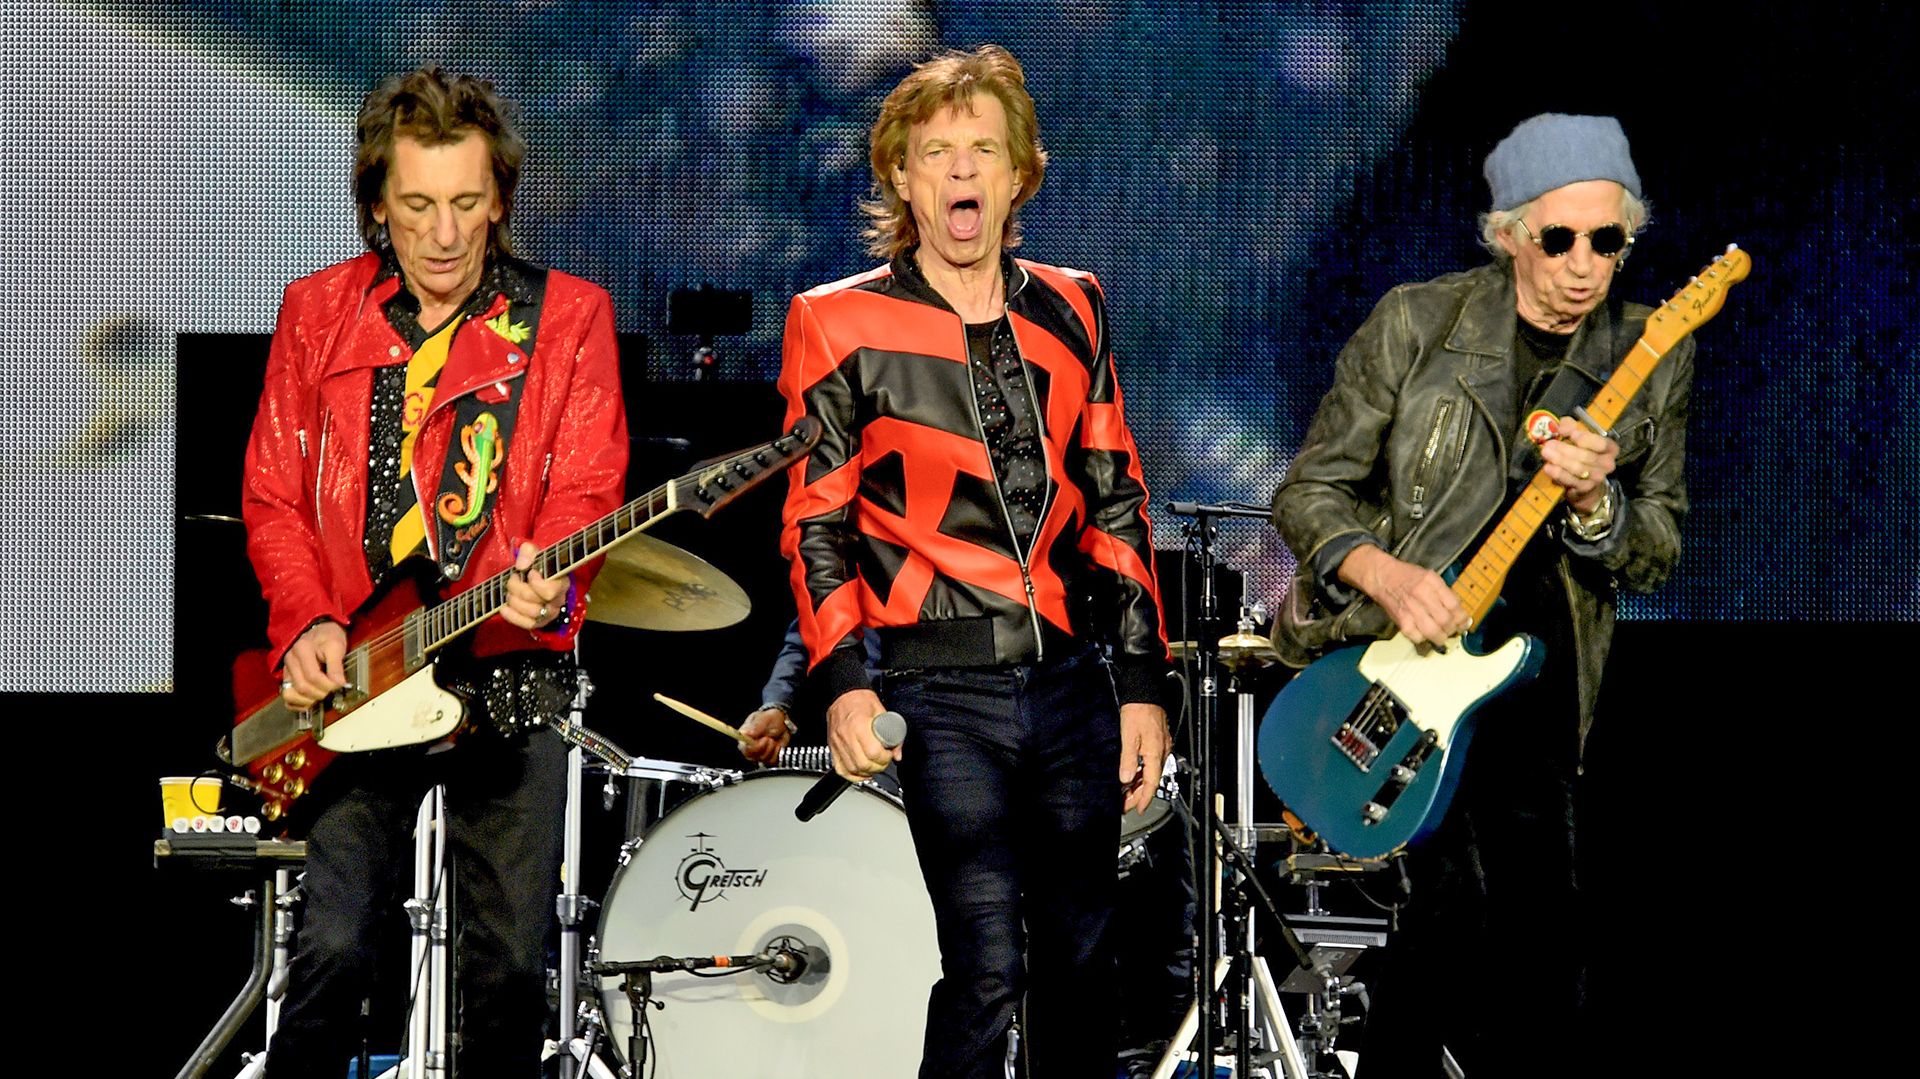 Fans believe The Rolling Stones are teasing a new album called ‘Hackney